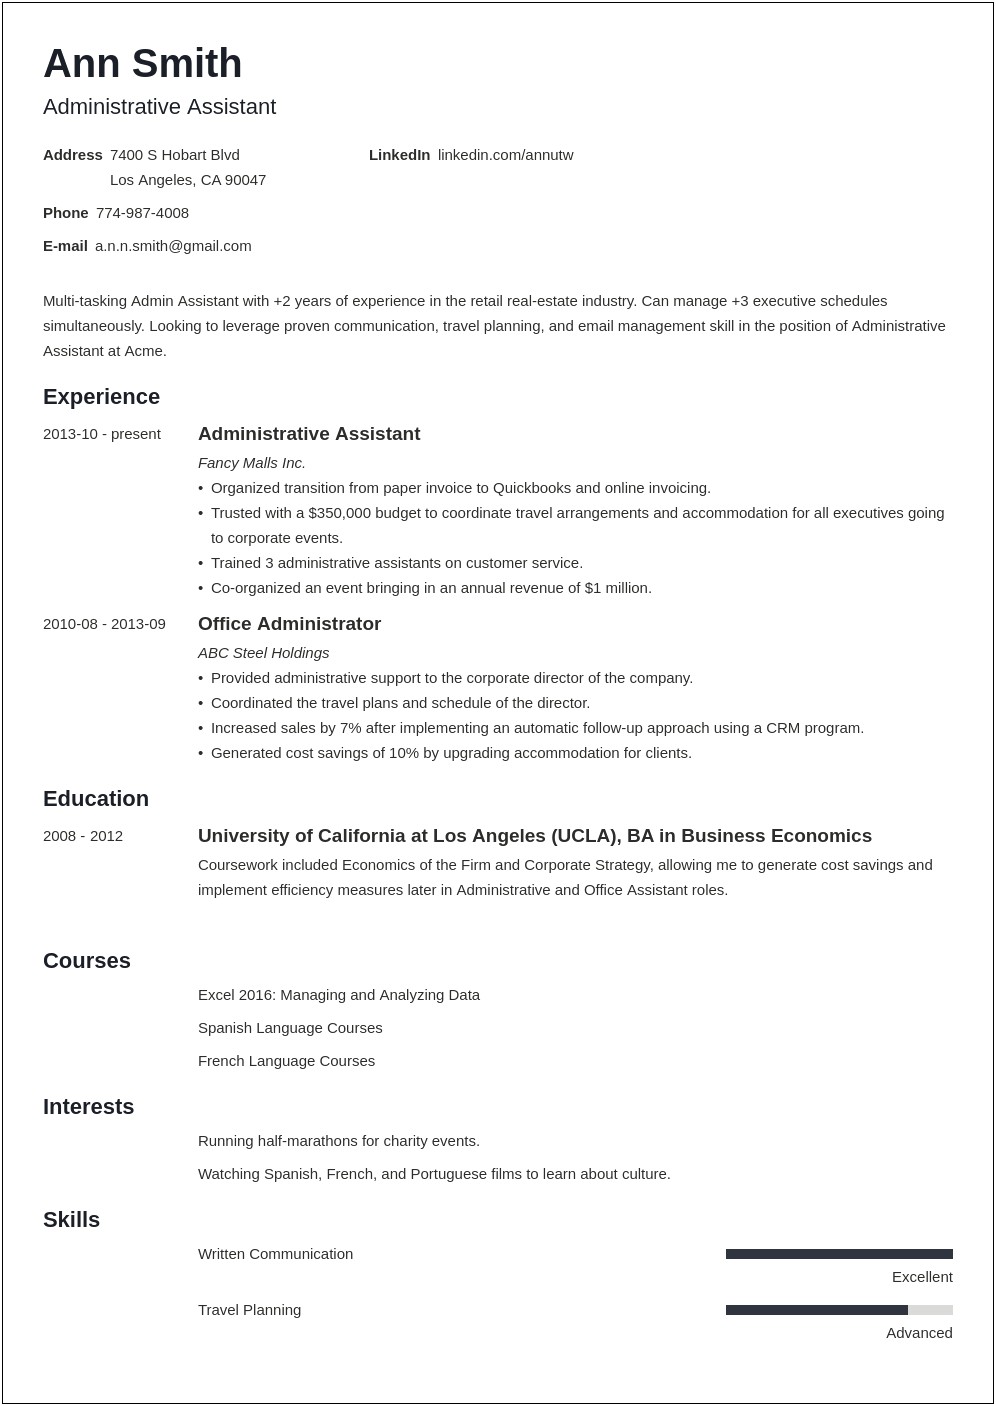 Best Executive Assistant Resume 2014